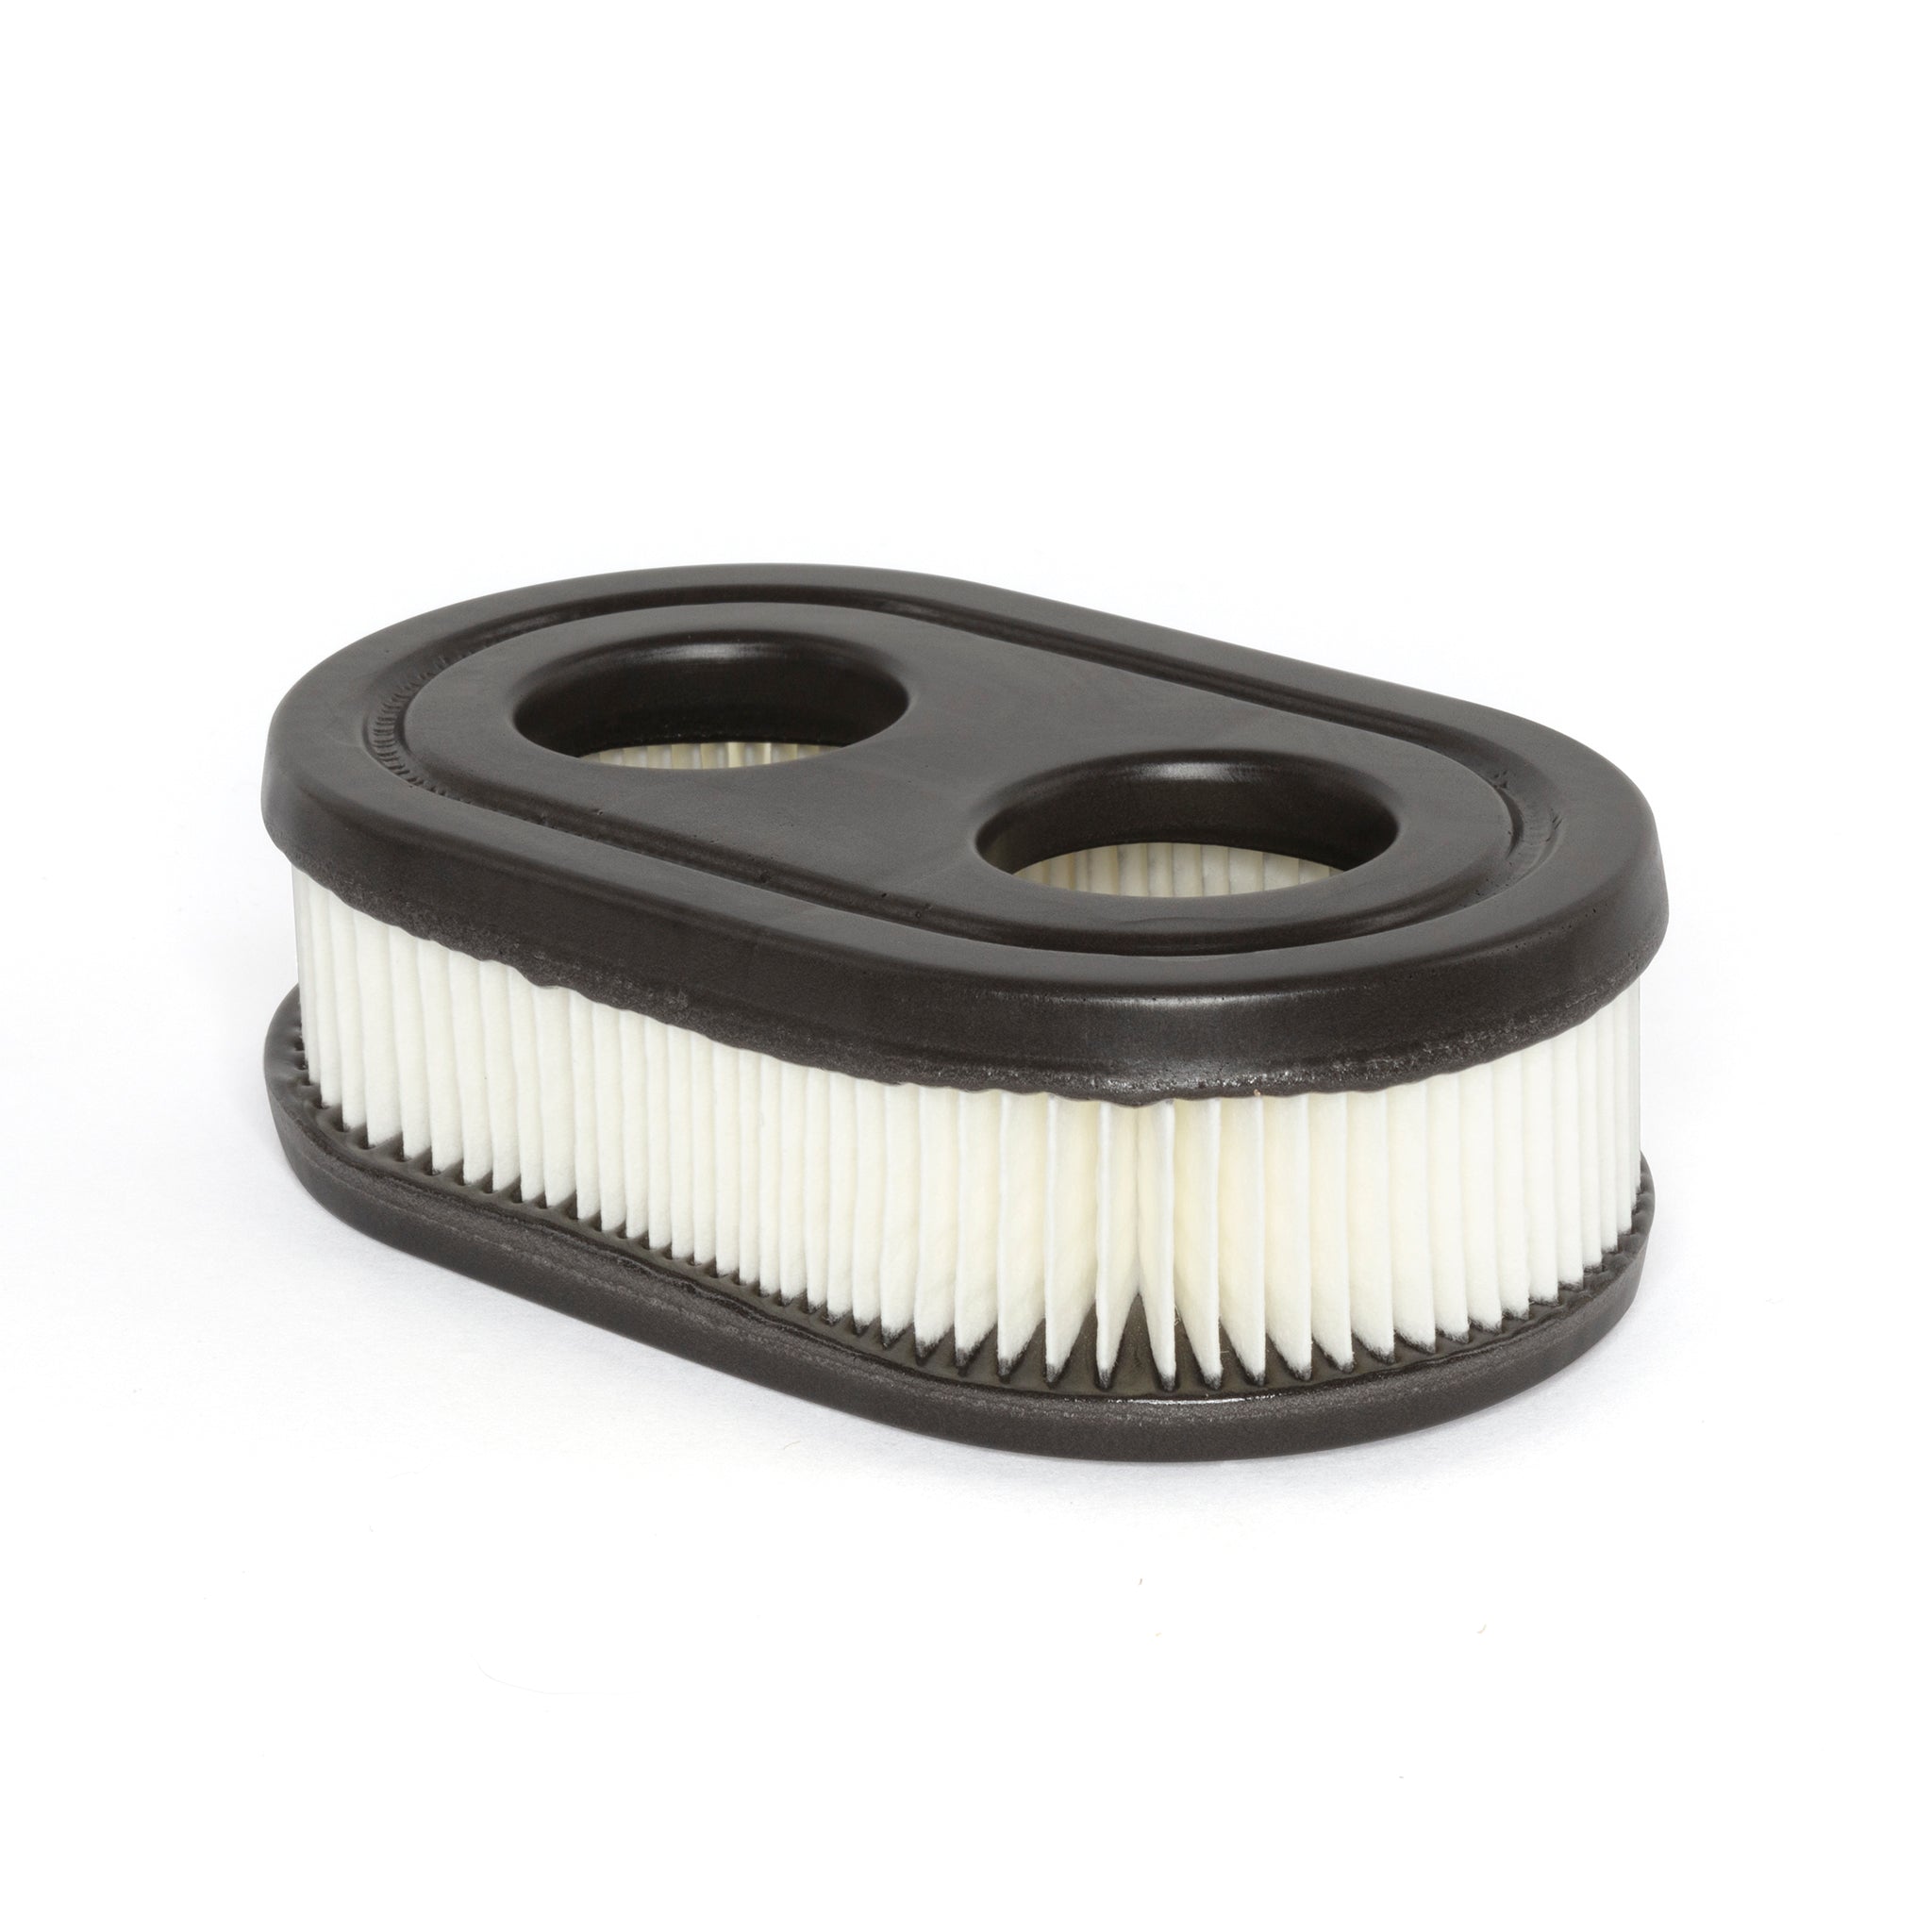 Briggs & Stratton Lawn Mower Air Filter for Select Briggs